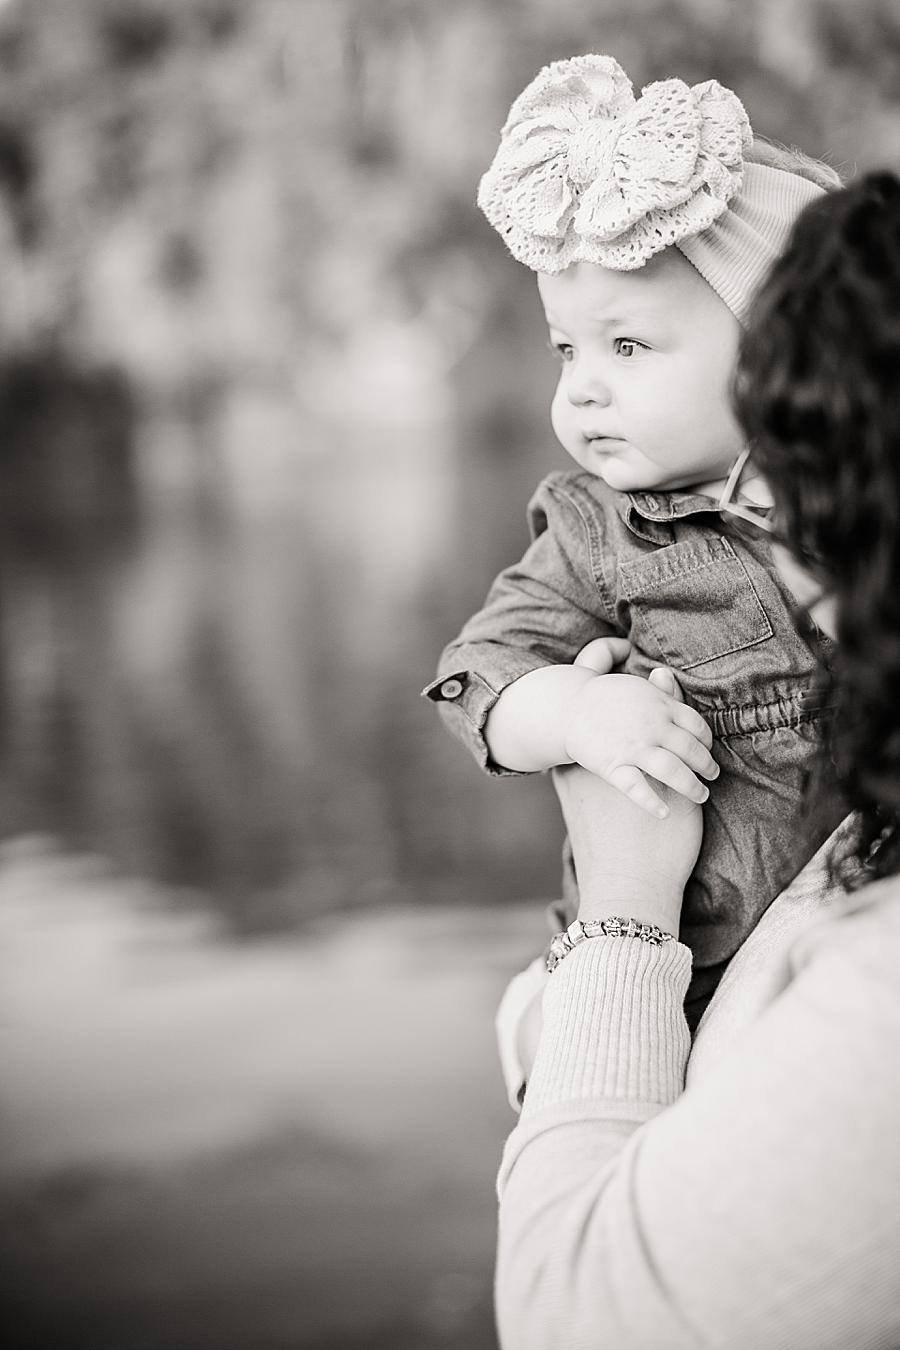 Baby with mom at this Melton Hill Park 1 by Knoxville Wedding Photographer, Amanda May Photos.